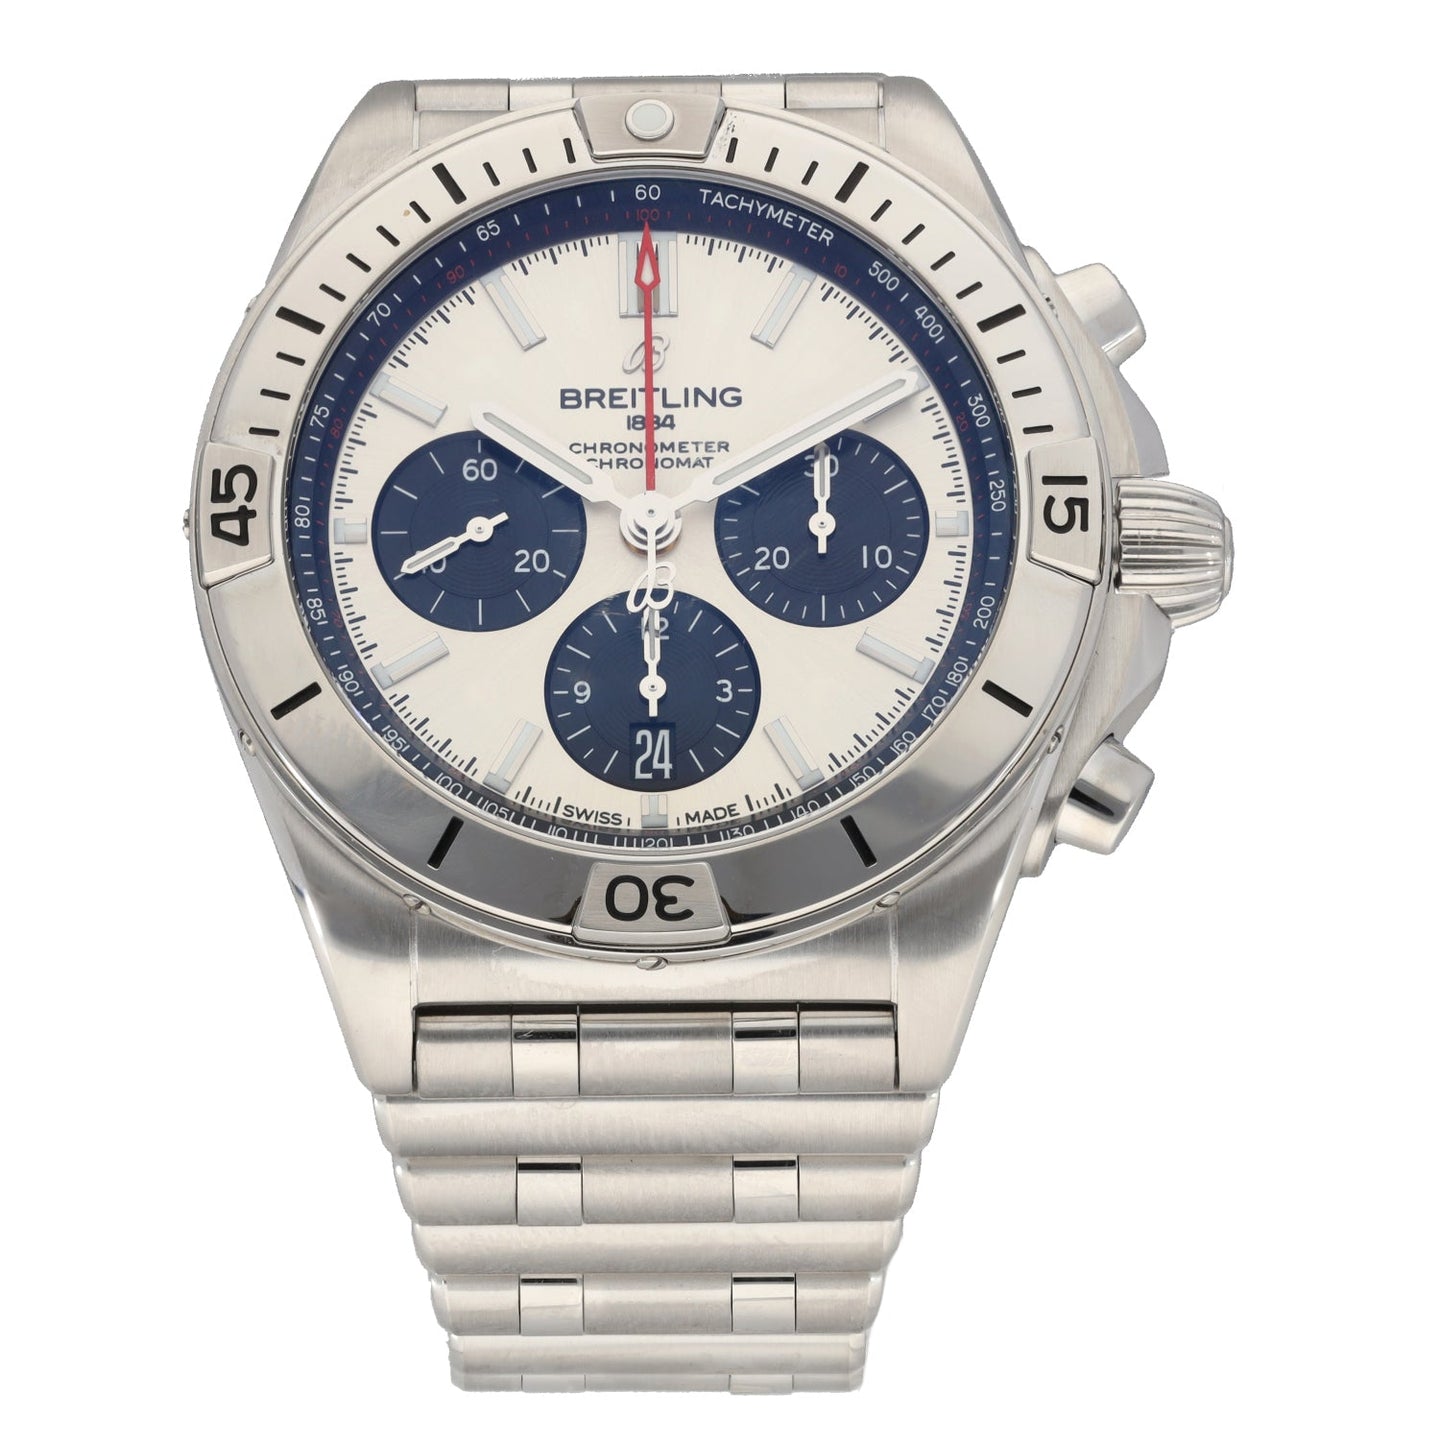 Breitling Chronomat AB0134 42mm Stainless Steel Watch